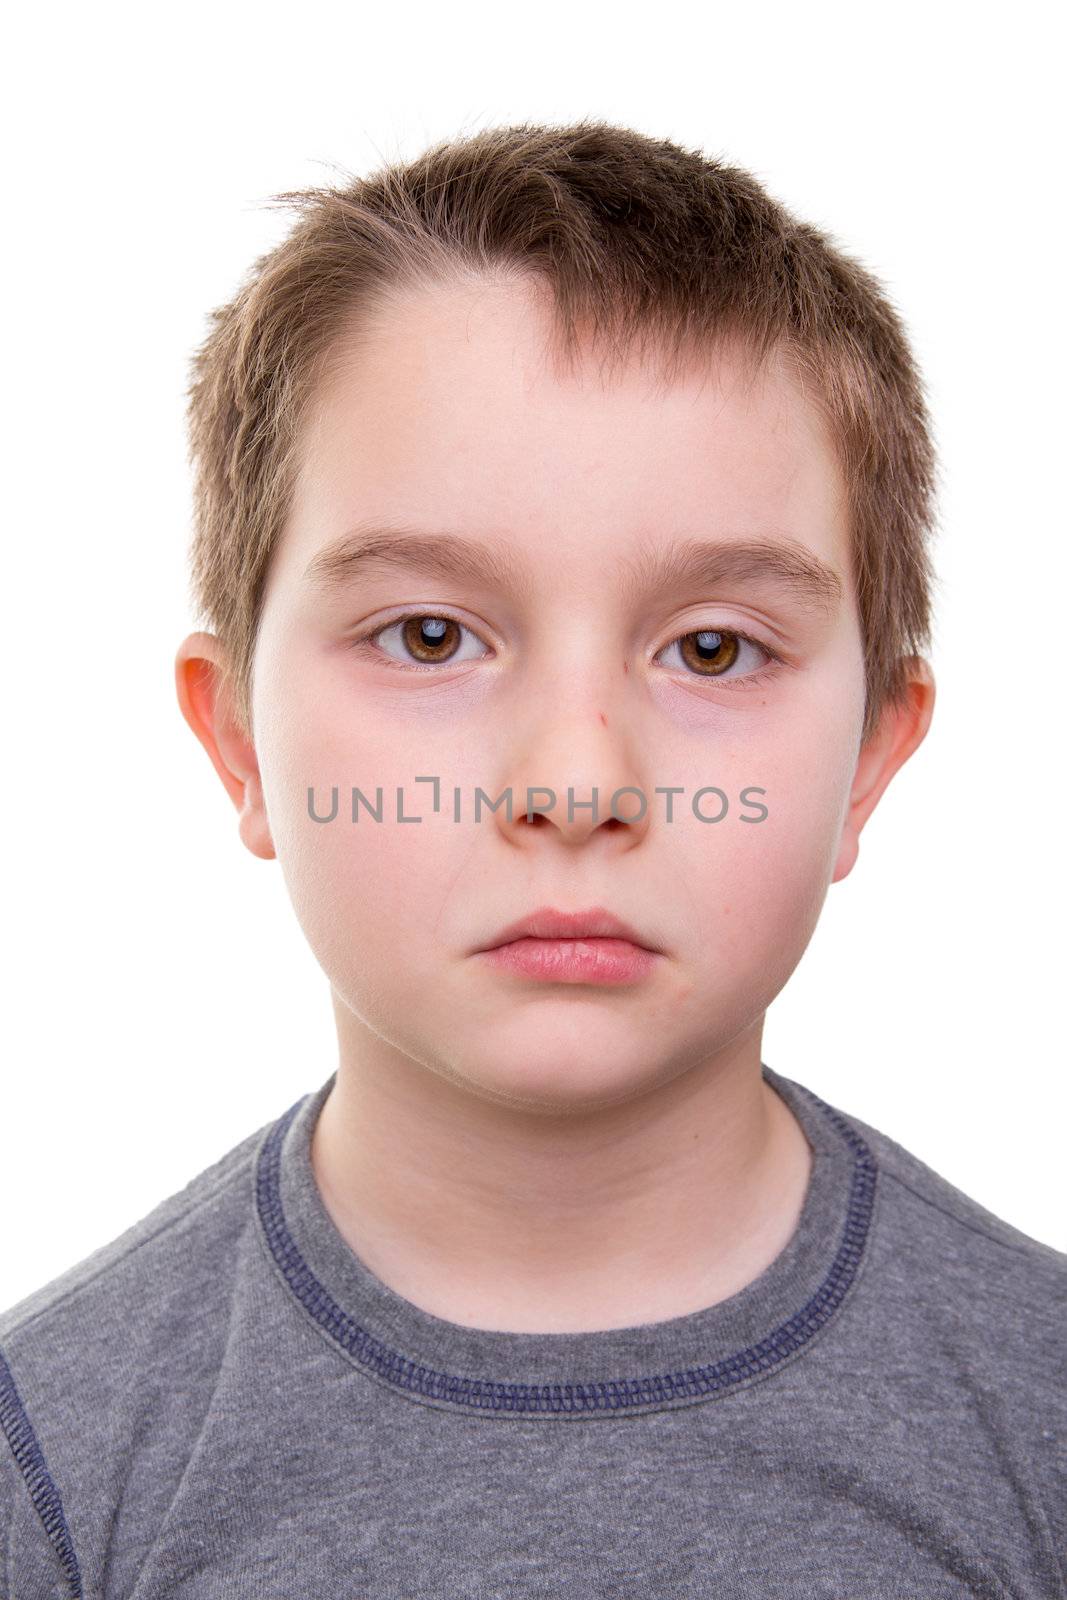 Sad kid having depression, that you can see in his eyes, shoulders and expression, isolated on white,